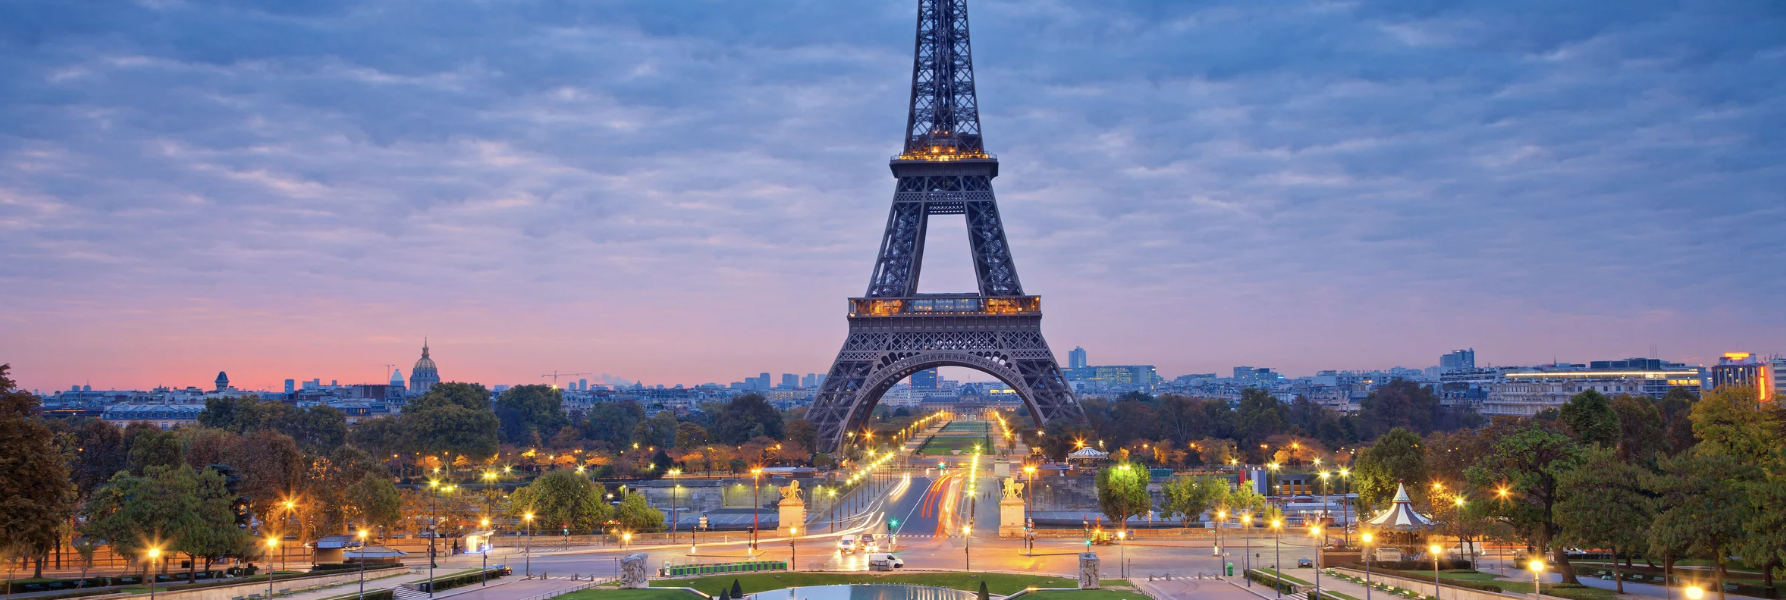 made in france : tour eiffel